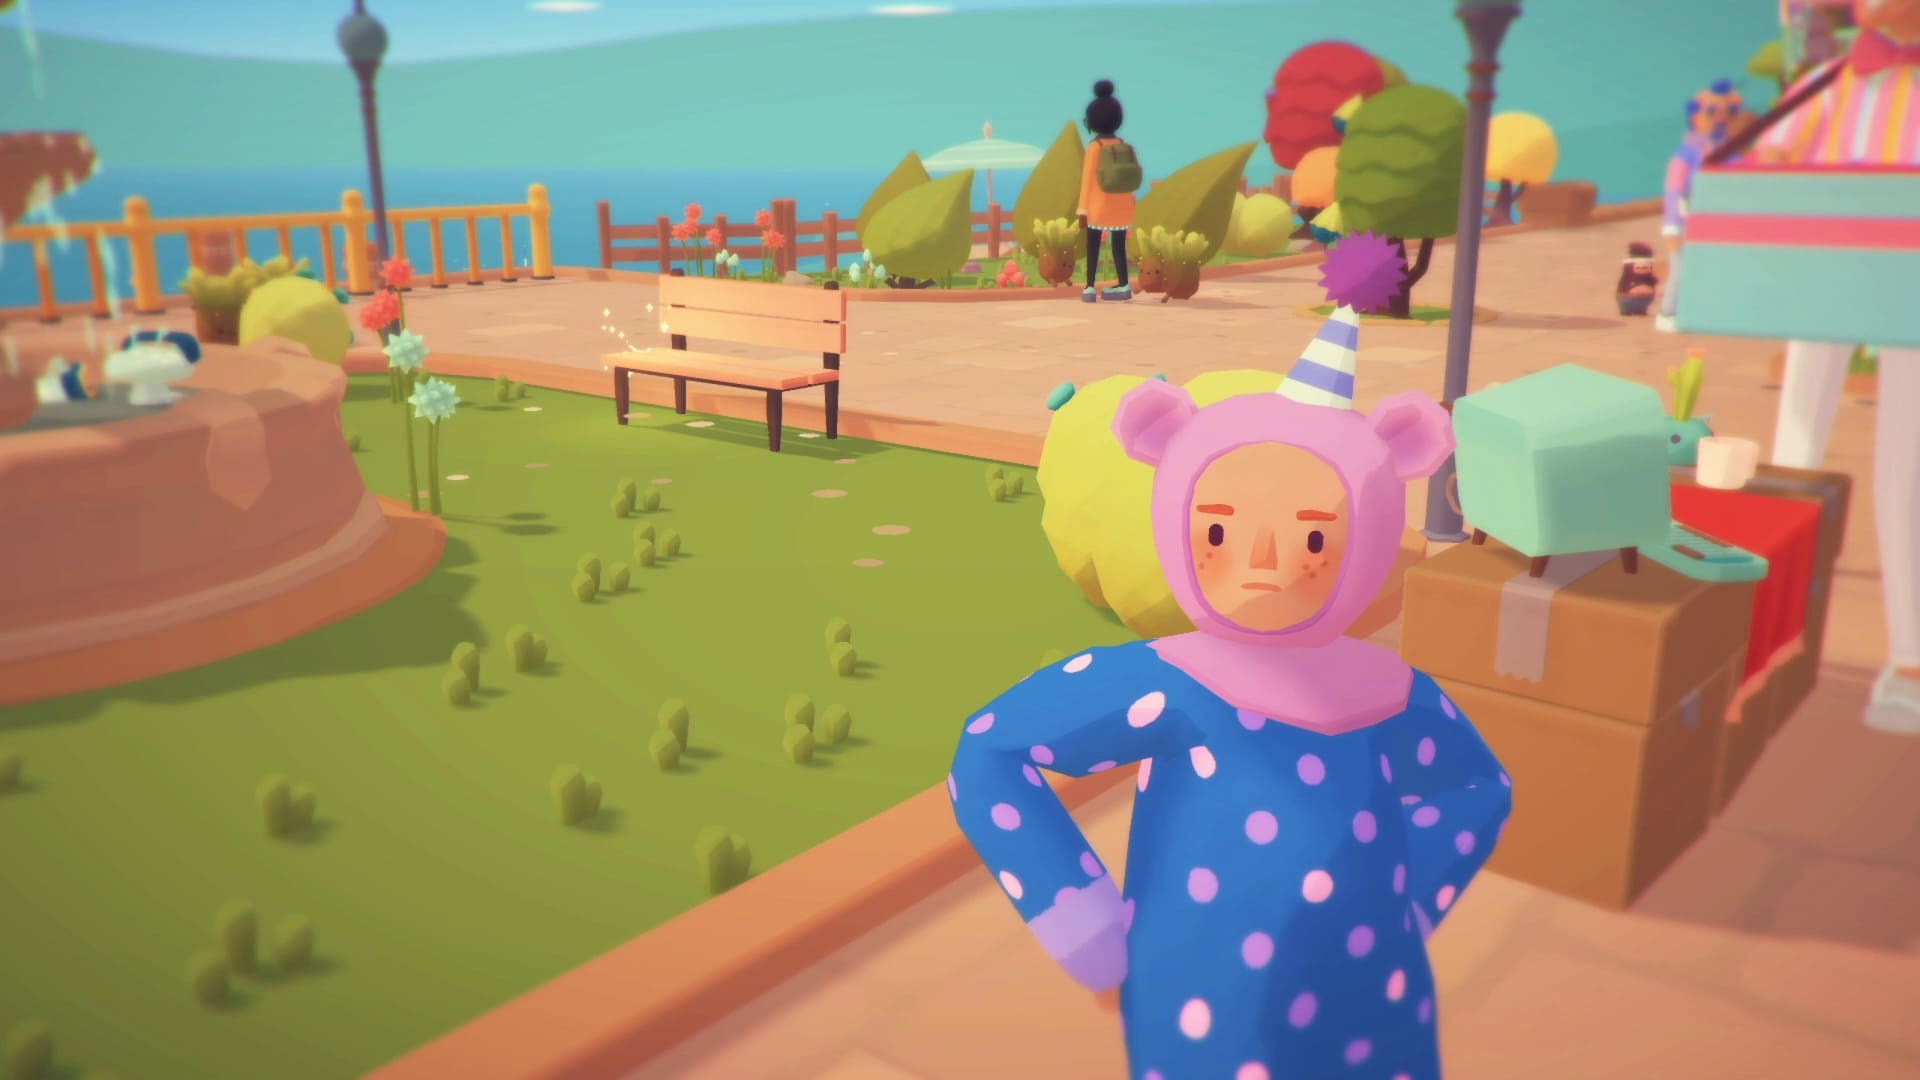 Screenshot of Taffy from Ooblets standing near the Wishywell